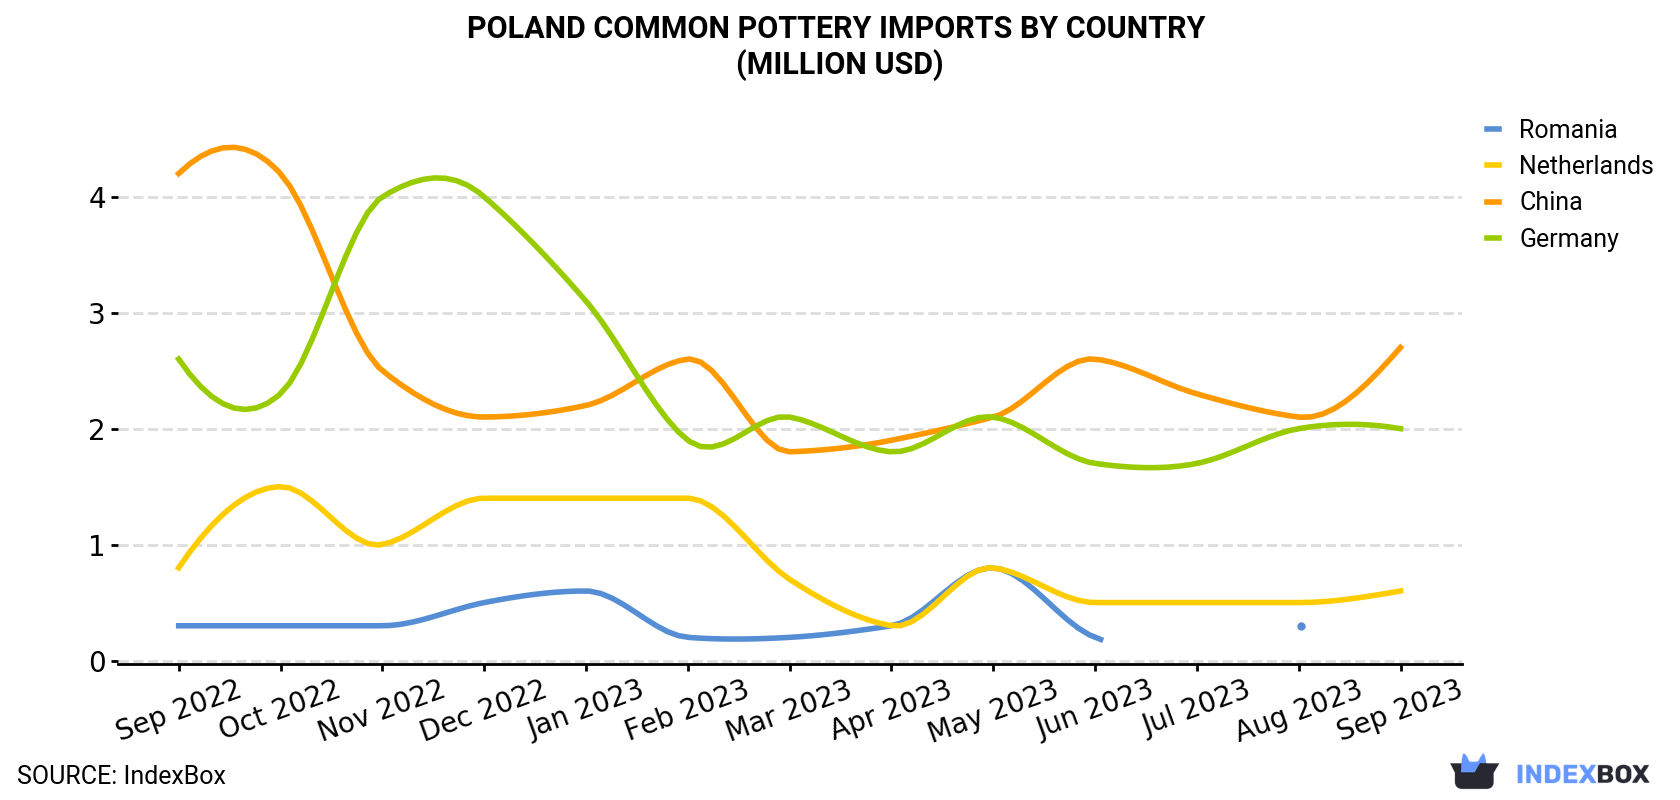 Poland Common Pottery Imports By Country (Million USD)